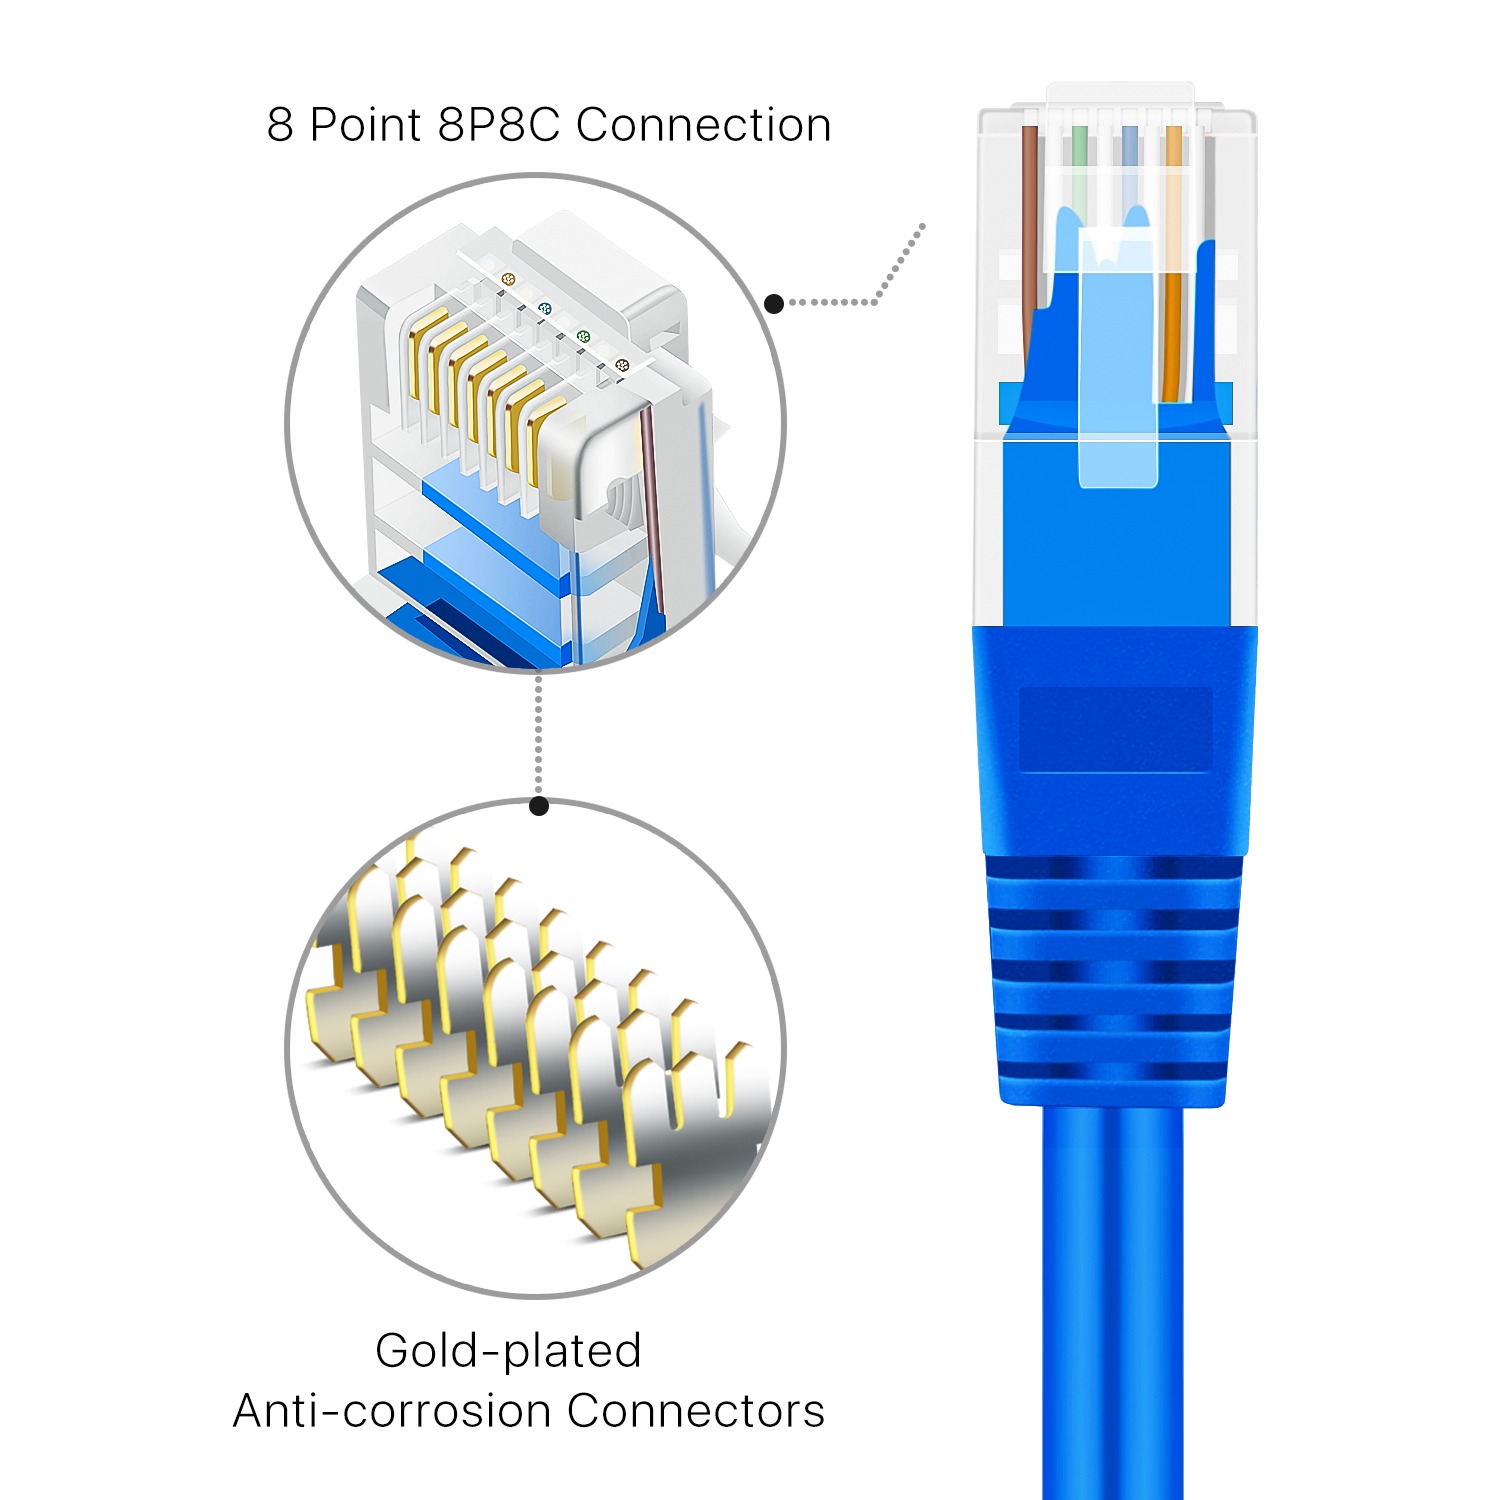 Flexible and durable Cat5 cable support high bandwidth of up to 550 MHz guarantees high-speed data transfer for server applications, cloud computing, video surveillance and online high definition Full HD 1080P 4K UHD Ultra HD video streaming, online gaming, etc